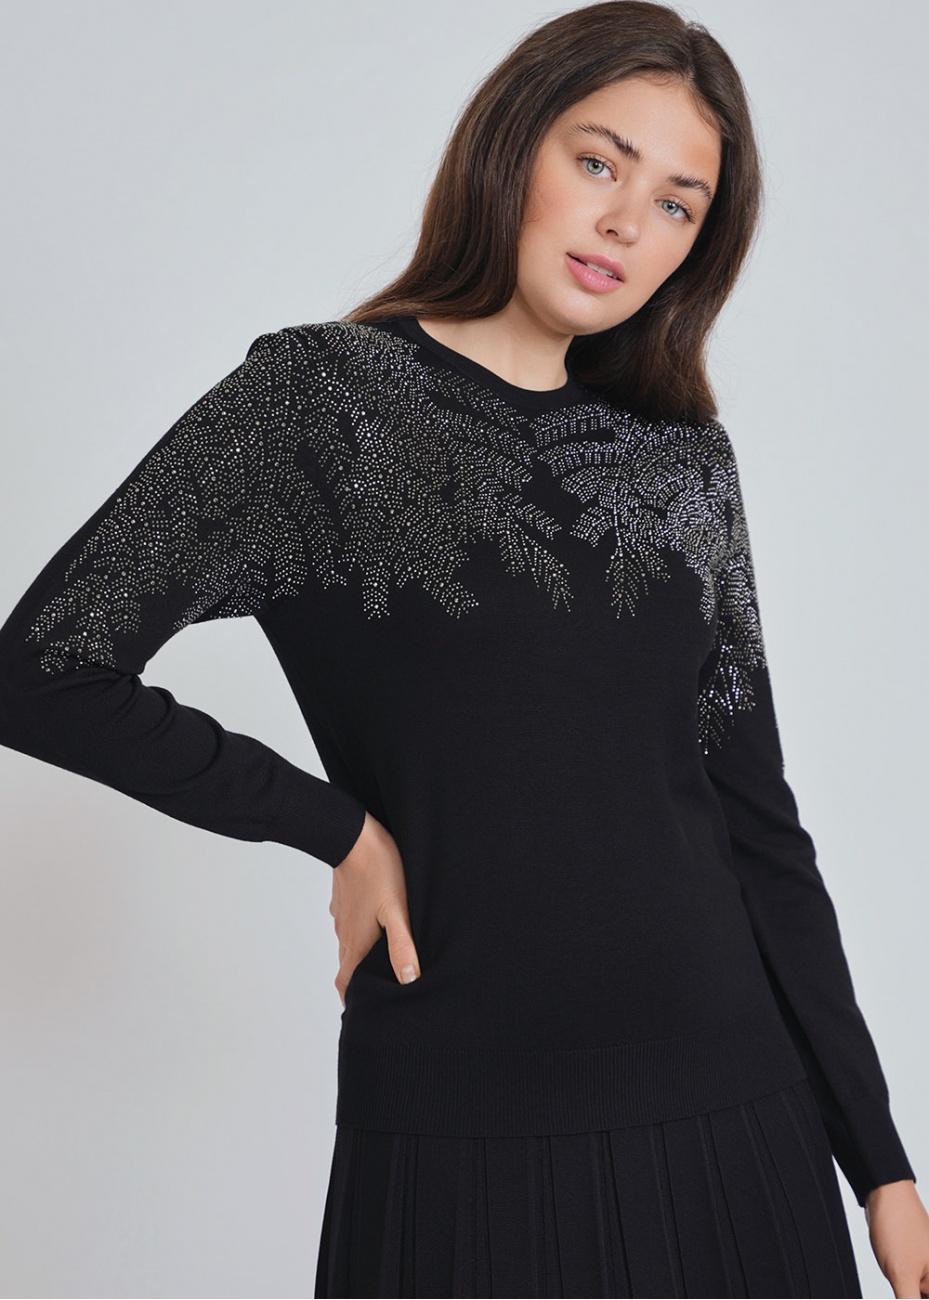 Black Sweater Graced with Sparkling Embellishments